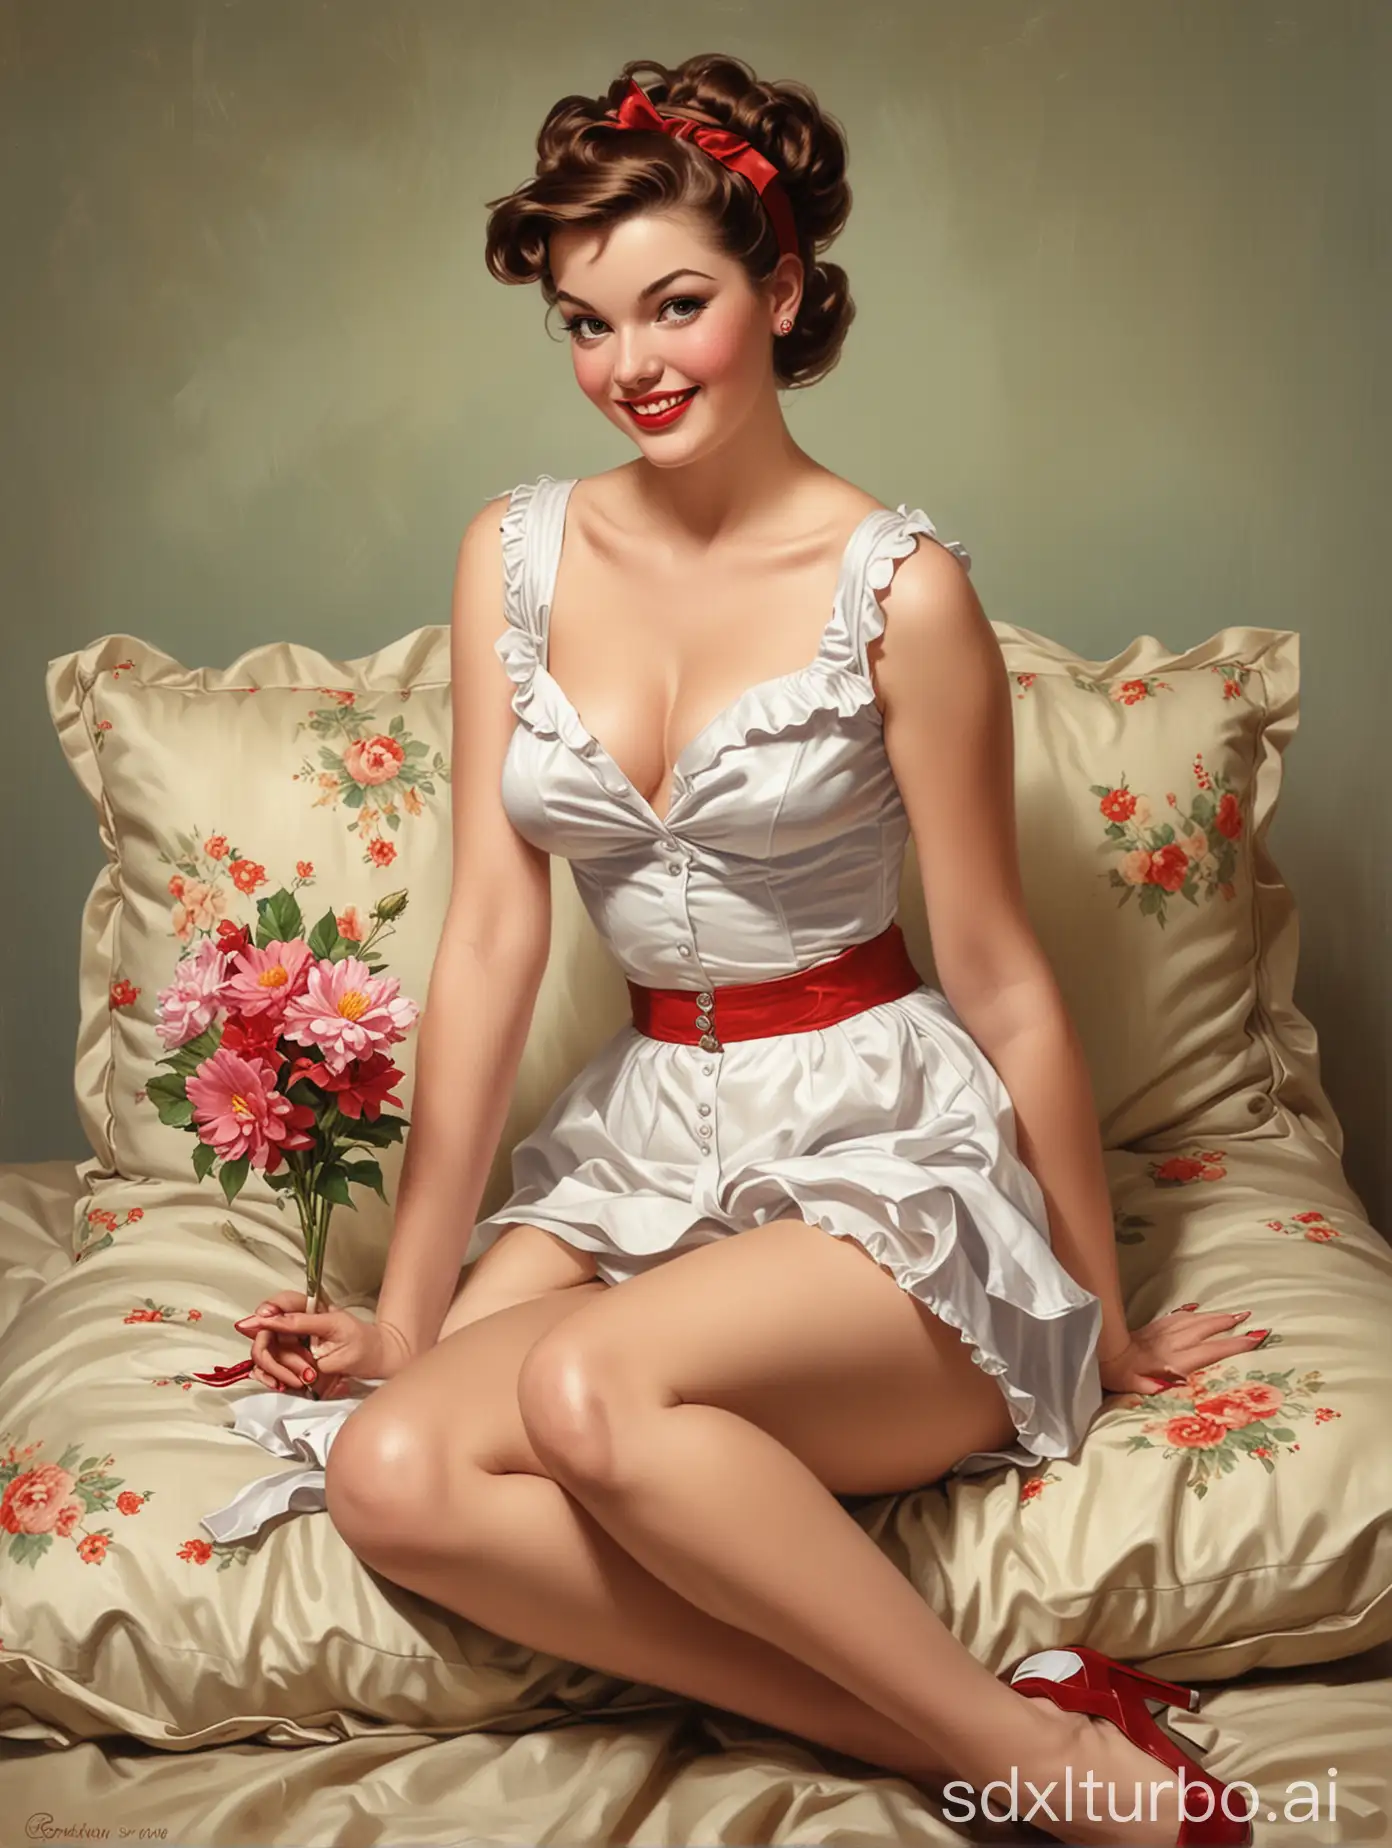 a painting of a woman sitting on a pillow, by Art Frahm, by Gil Elvgren, gil elvgren style, by Joyce Ballantyne Brand, artgerm and gil elvgren, by Andrew Loomis, pinup art, by Alberto Vargas, by Ernest Briggs, elvgren, inspired by Gil Elvgren, by Rolf Armstrong, pin-up poster girl, picking up a flower, smiling fashion model face, garters, pencil painting, mischievous grin, the front of a trading card, young lady, young woman looking up, pinup